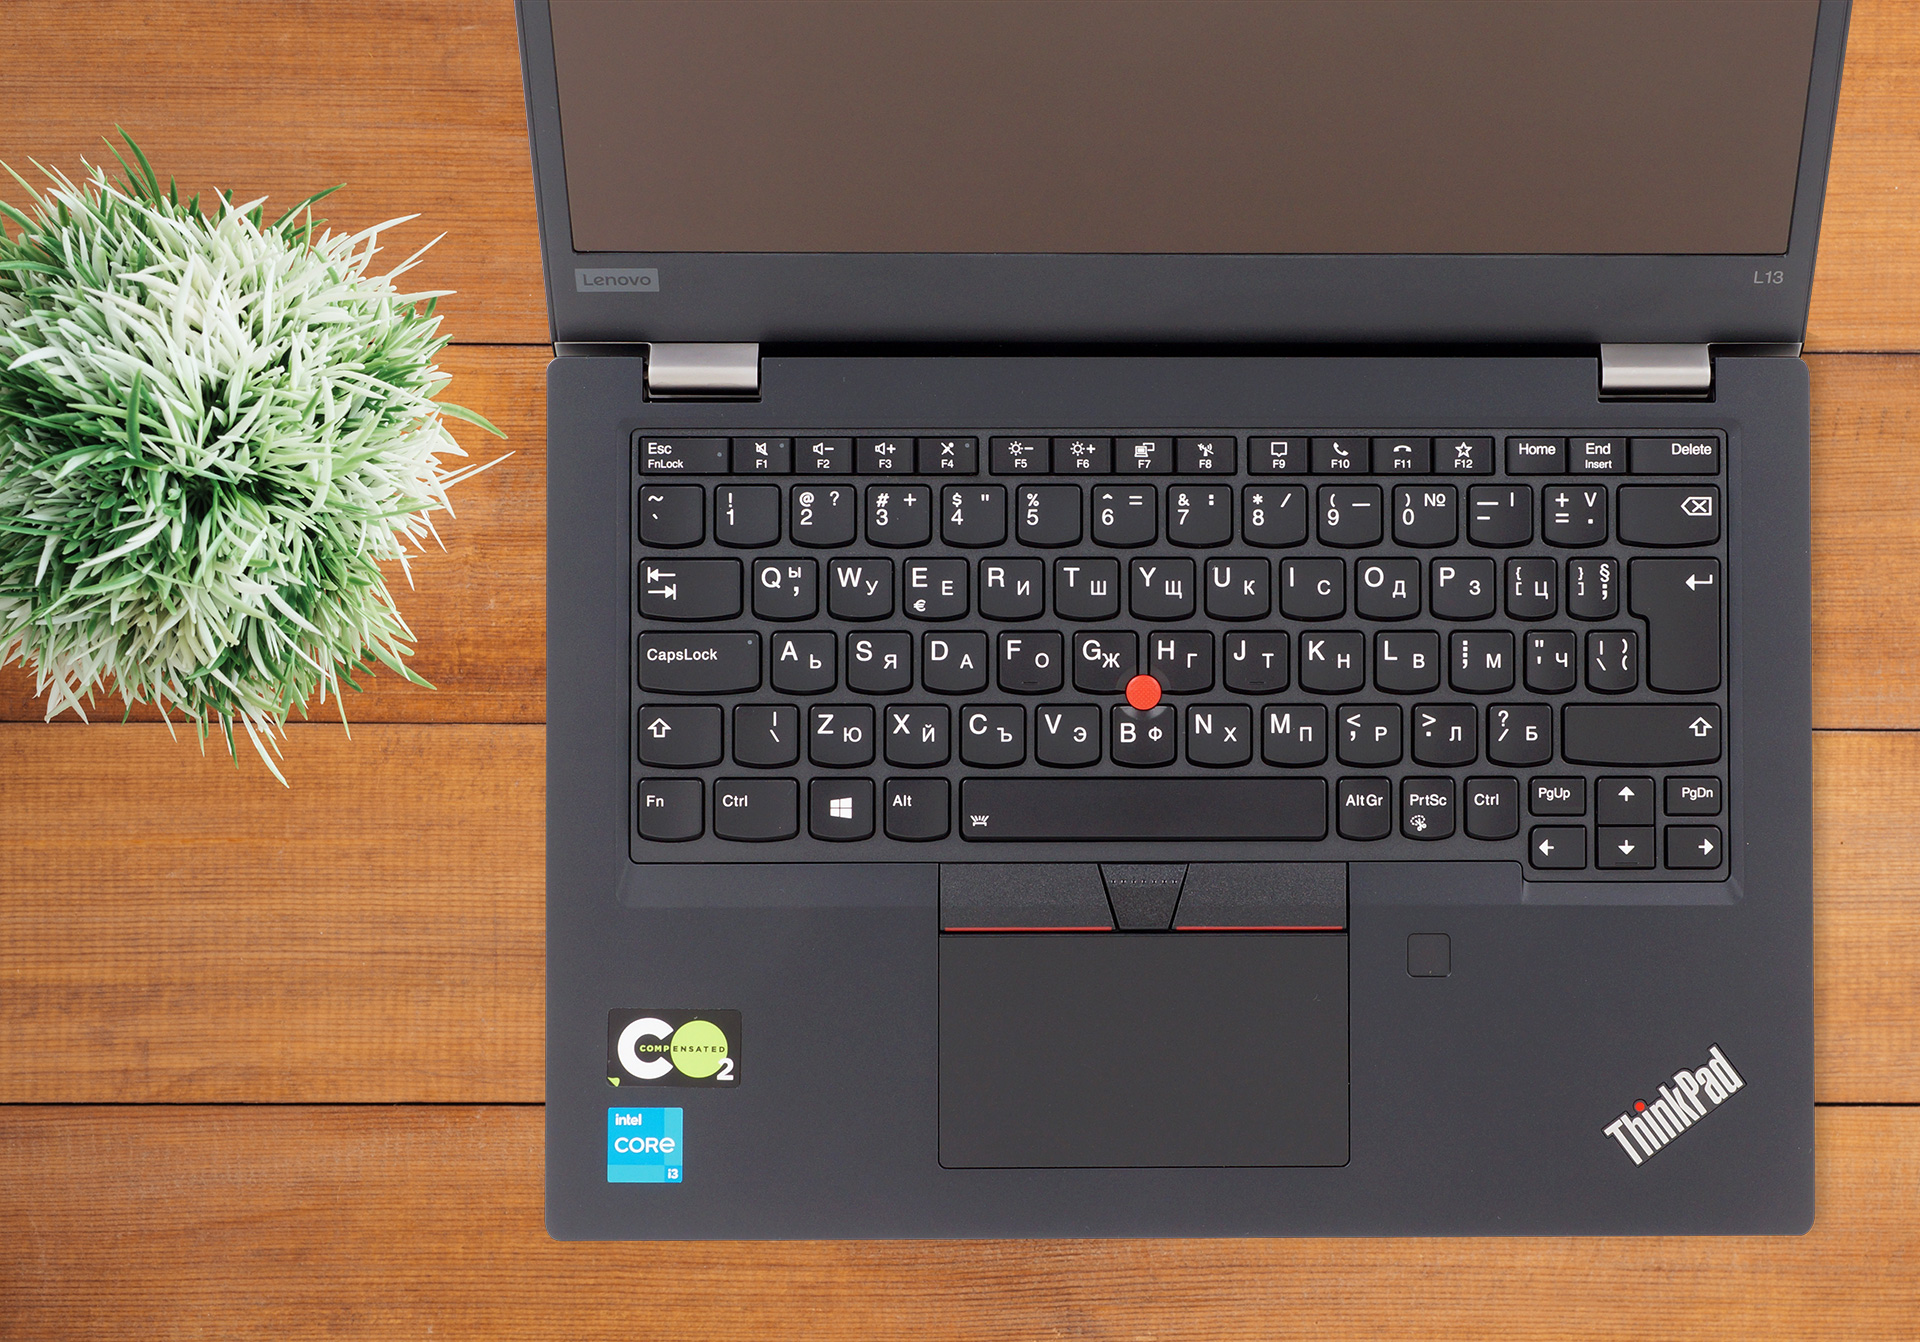 Lenovo ThinkPad L13 Gen 2 review - aimed at students and